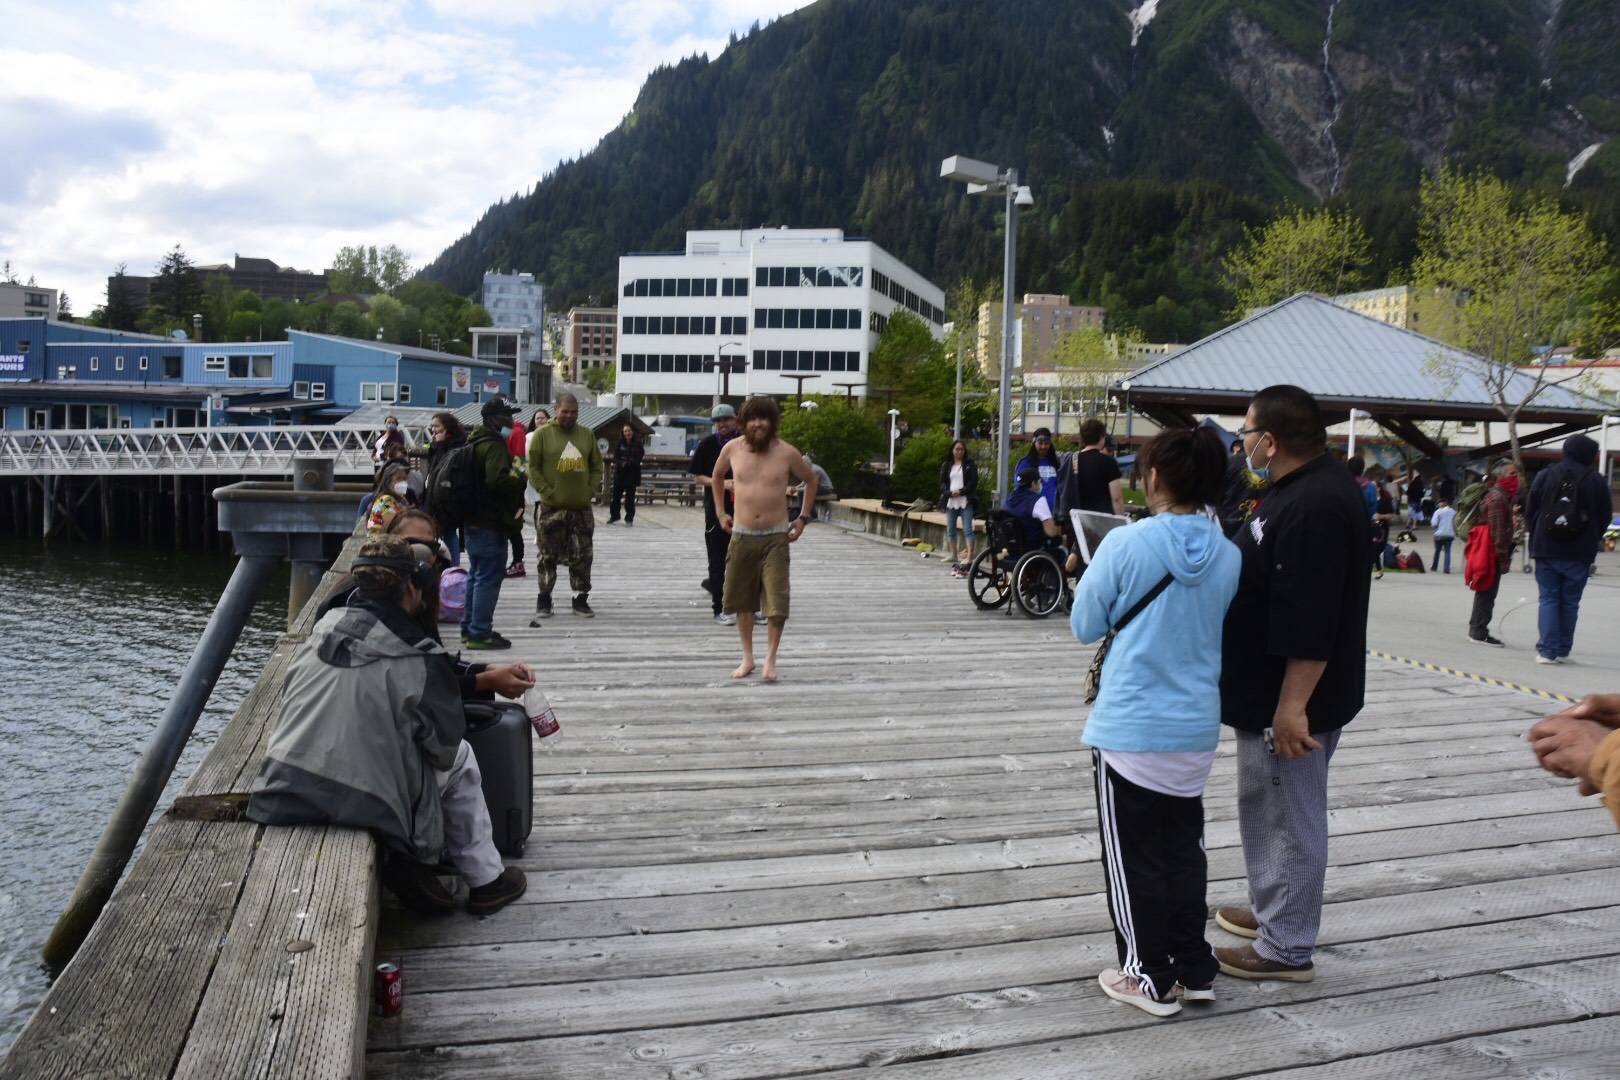 Juneauites take in the sun downtown on Friday, May 22, 2020. For the foreseeable future, locals will be the main source of revenue for businesses that typically rely on tourism money. That’s among financial concerns raised by the coronavirus, city officials said. (Peter Segall | Juneau Empire)